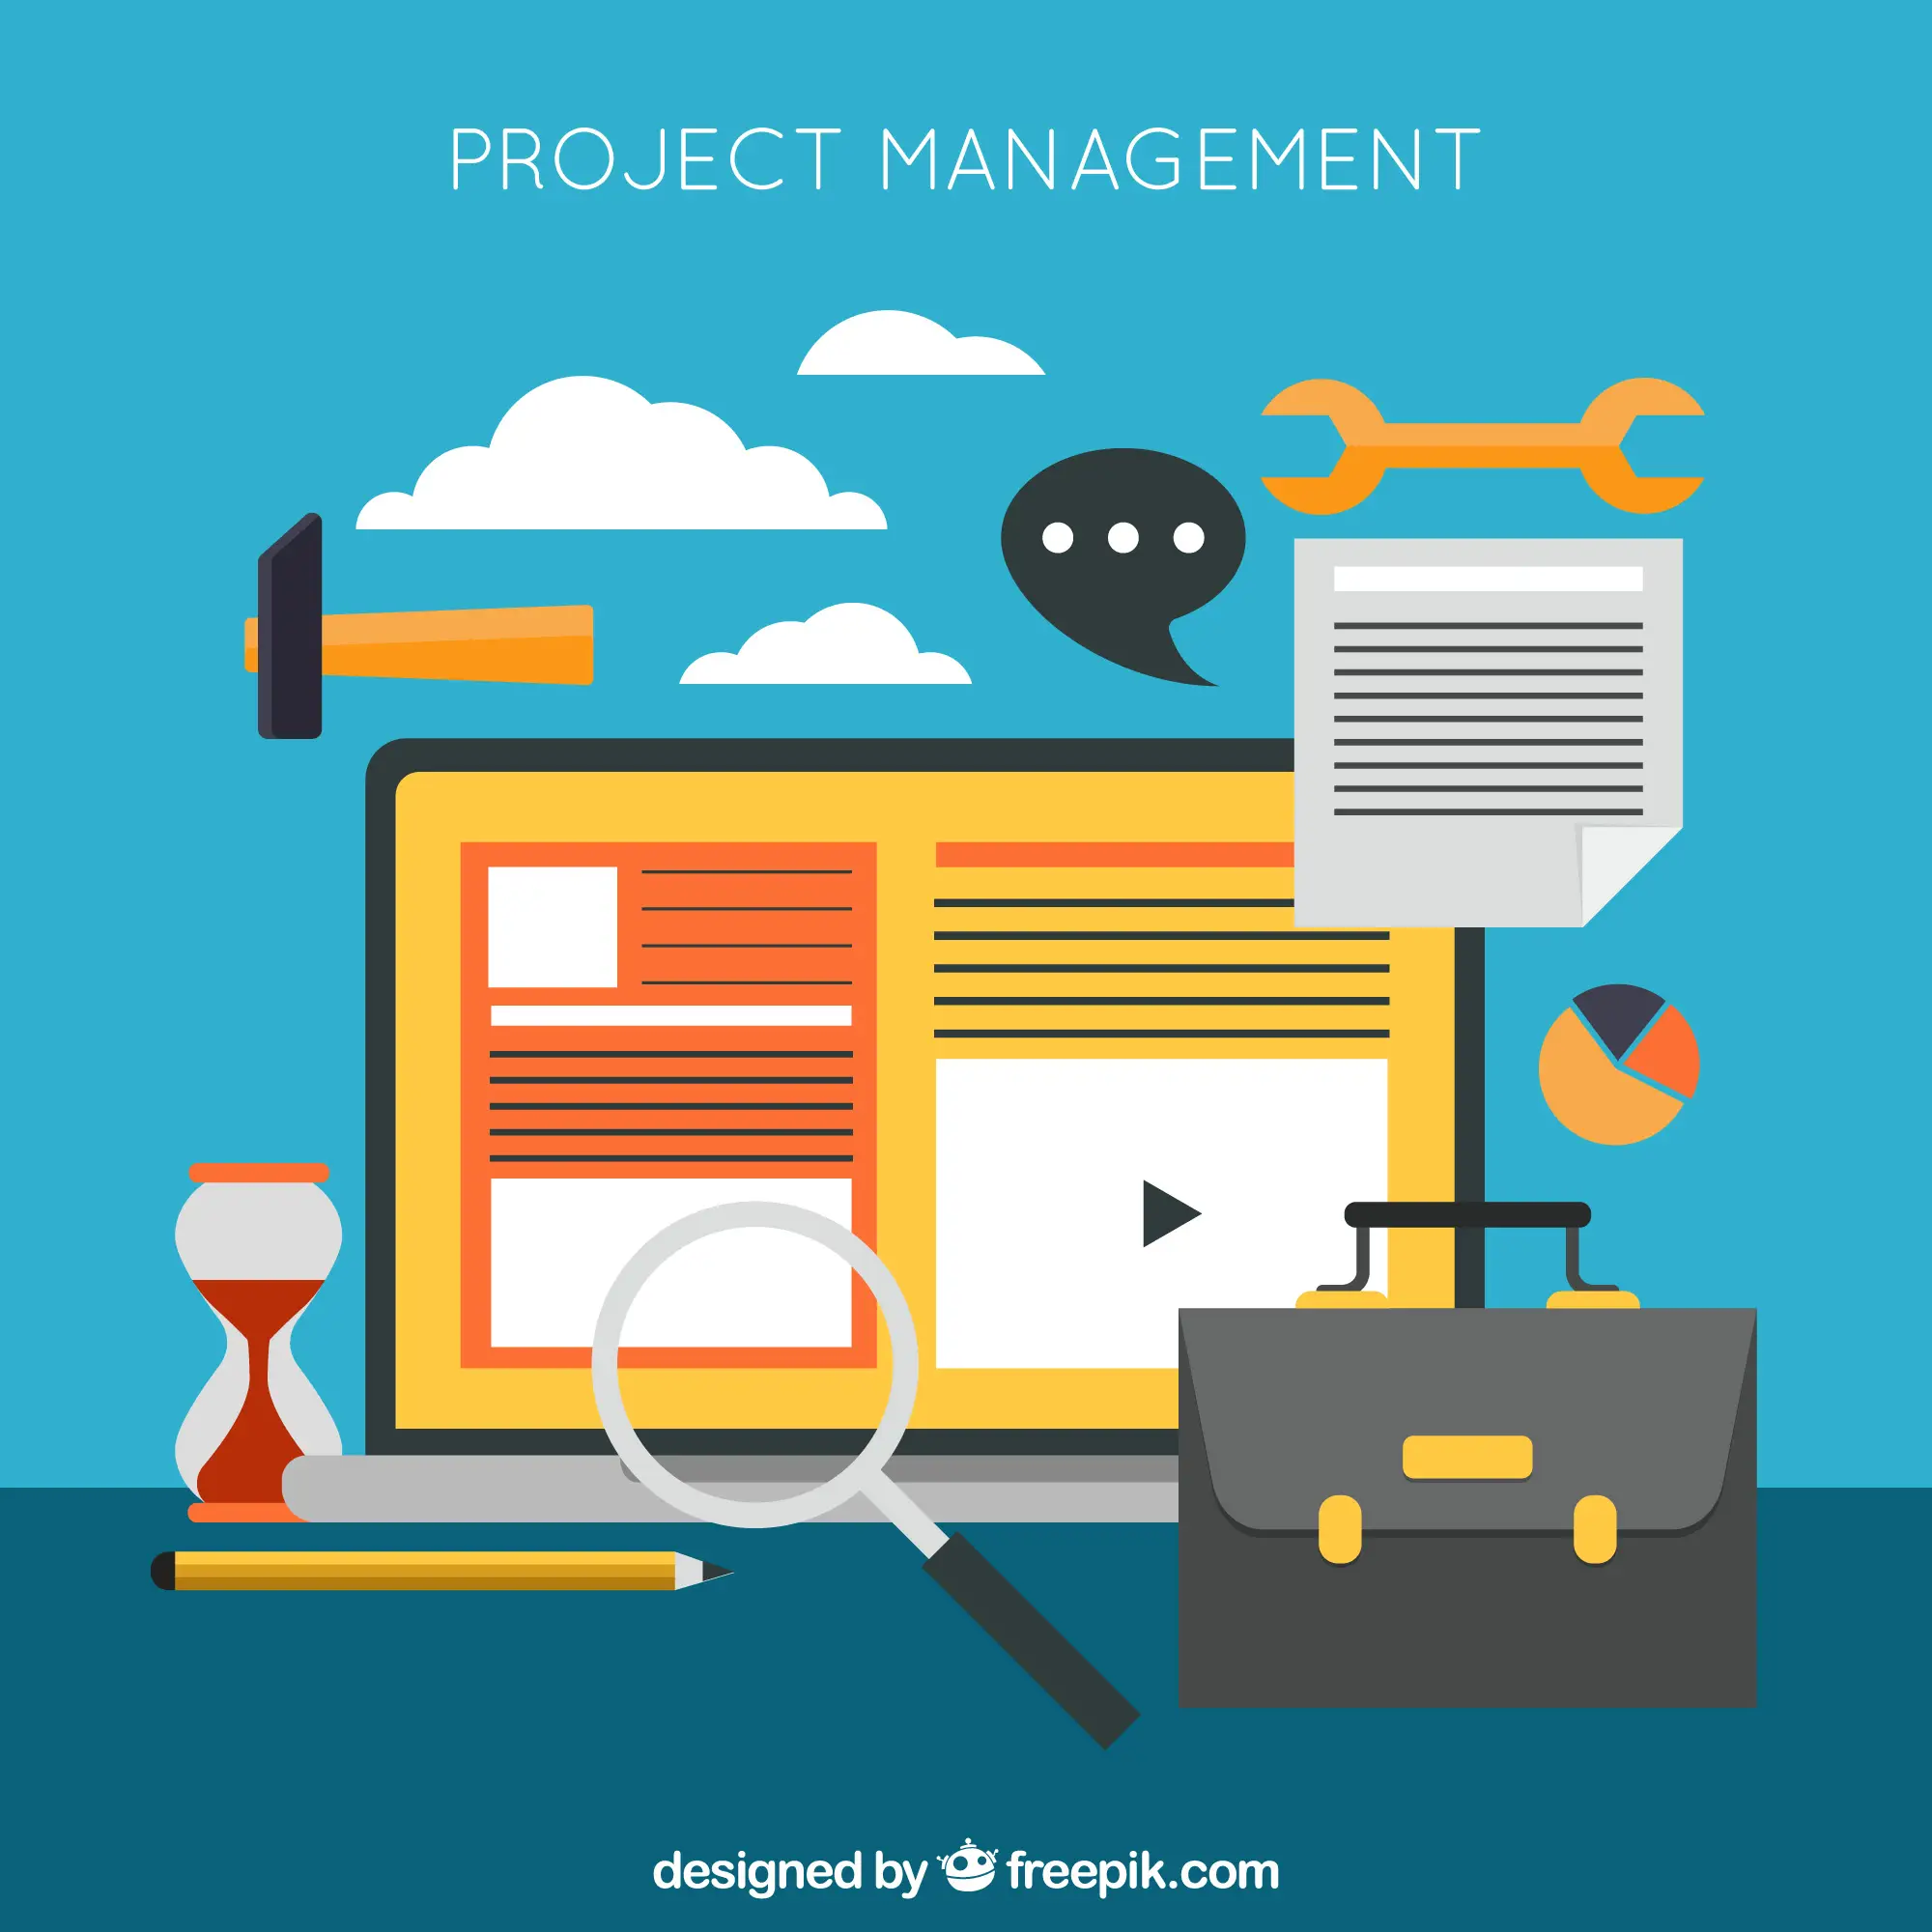 Project Management: Technical Library & Digitalisation